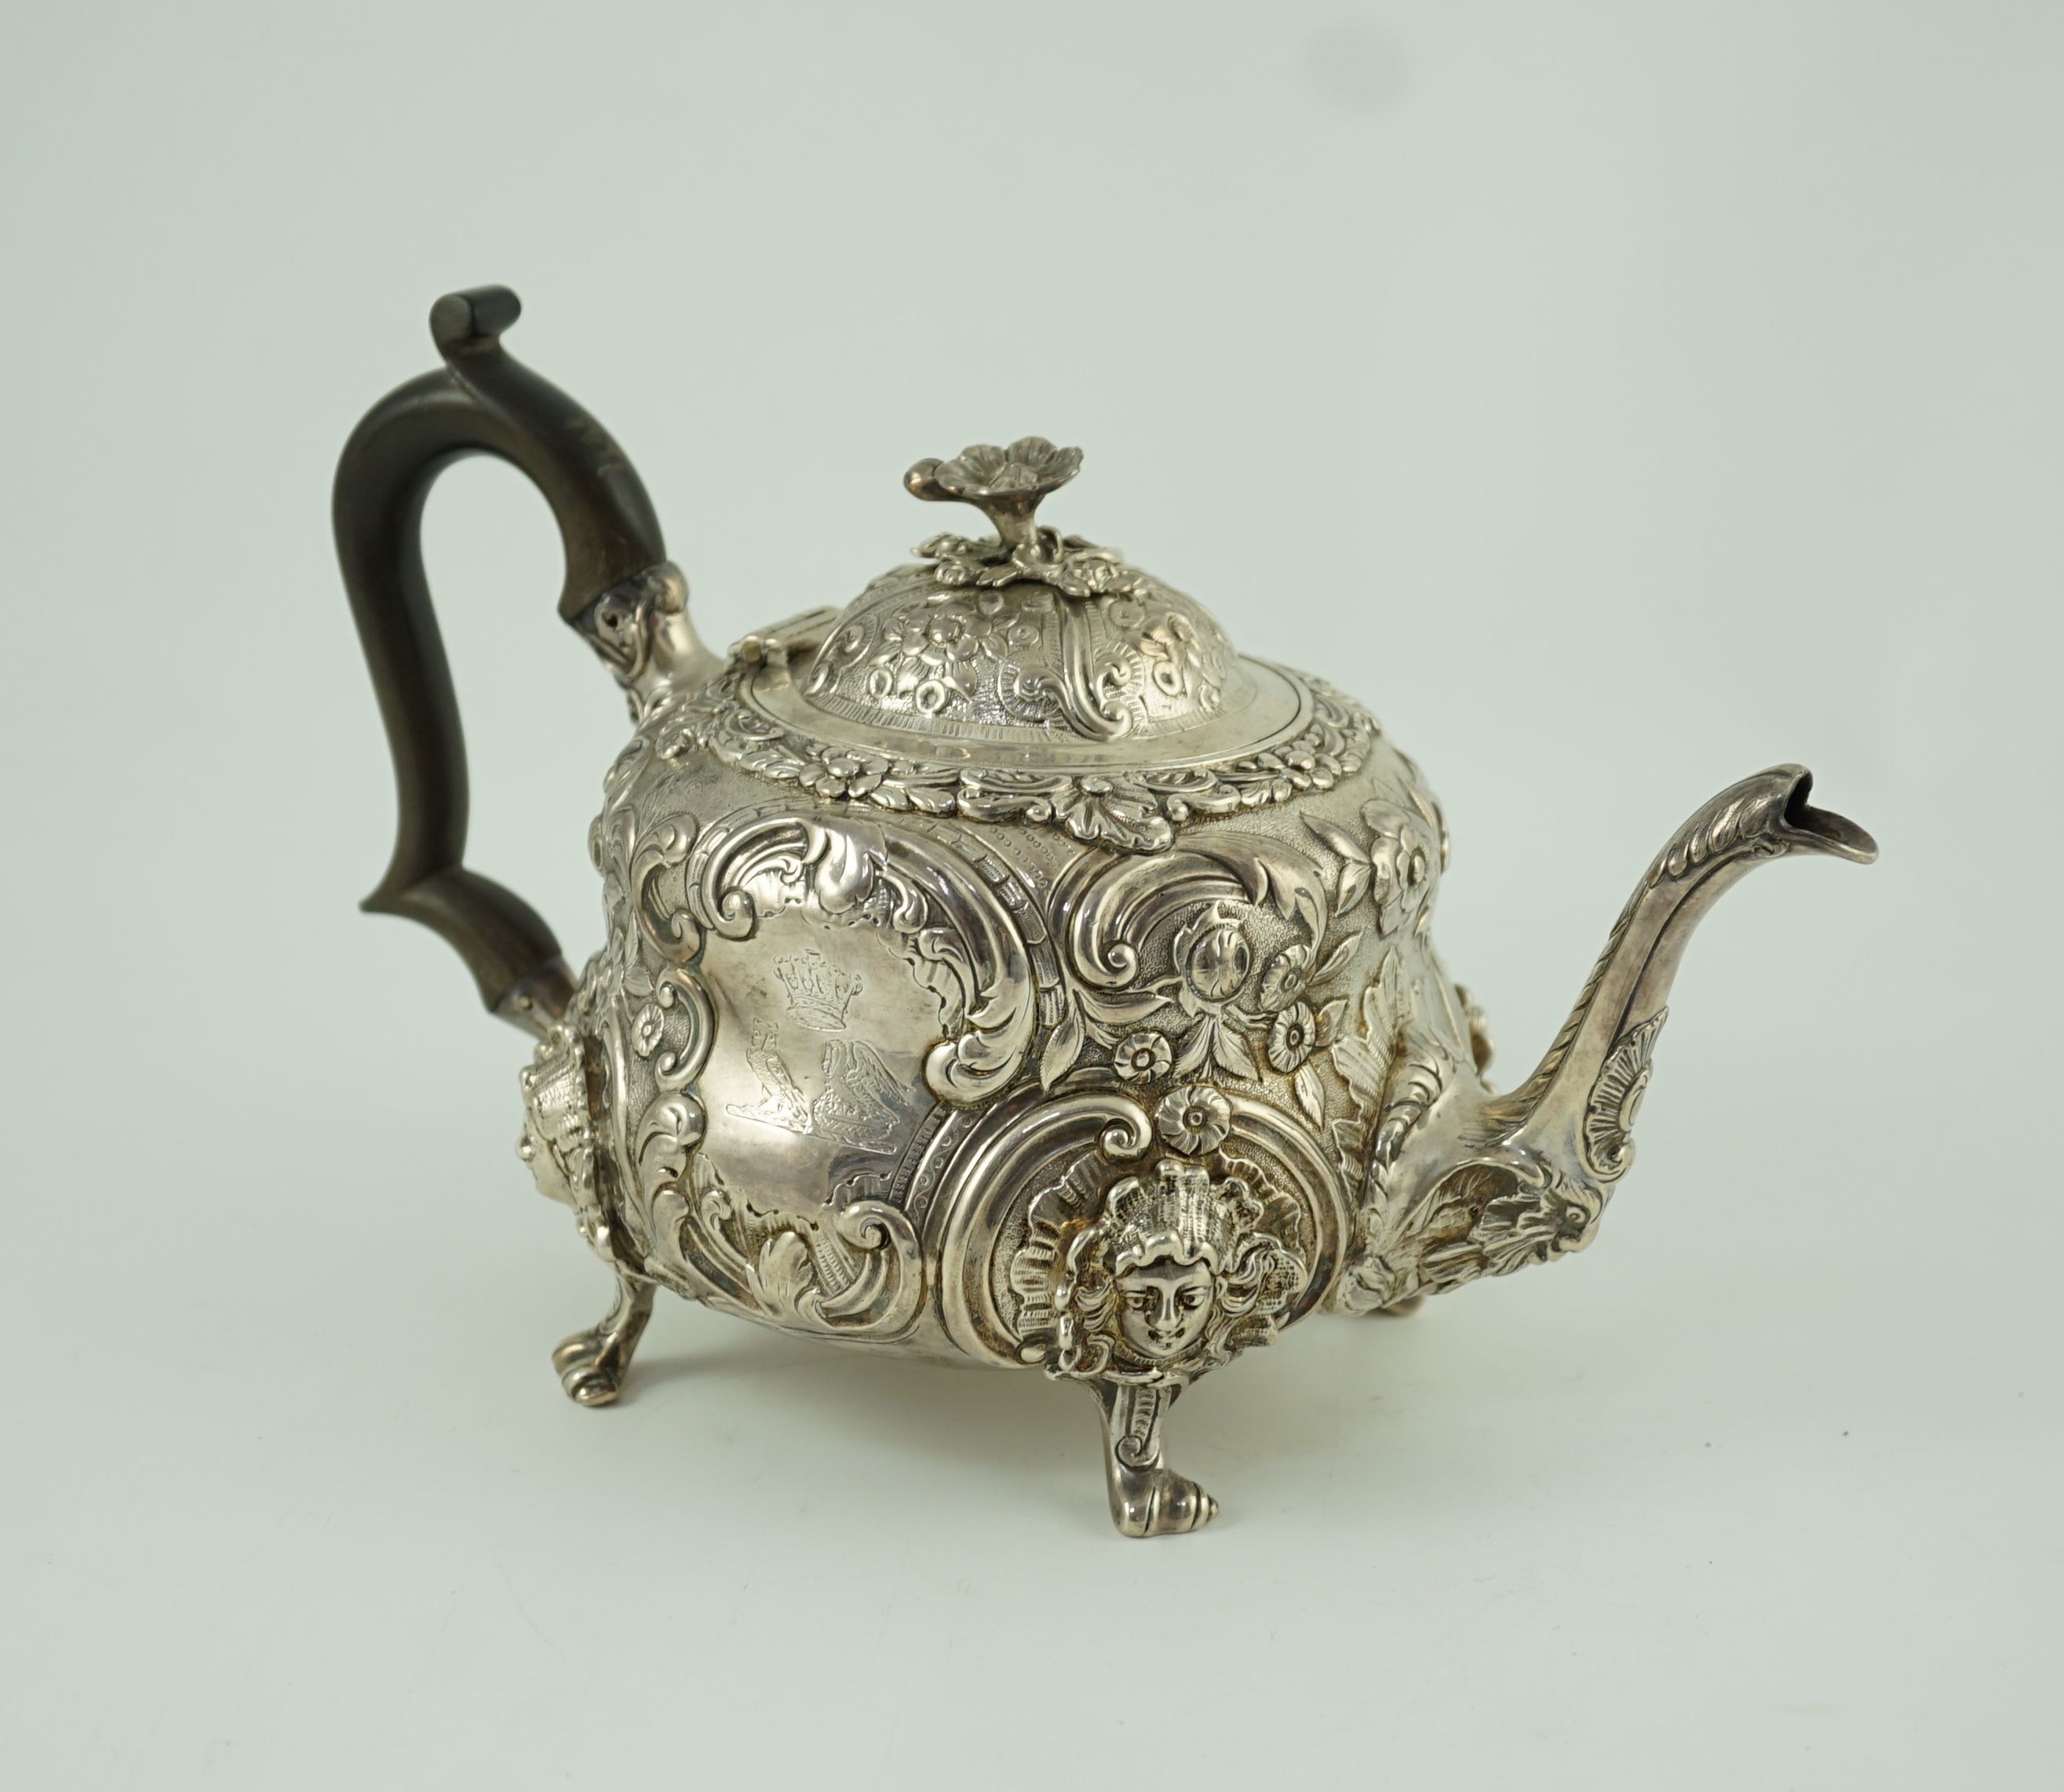 An early Victorian embossed silver teapot, by William Moulson